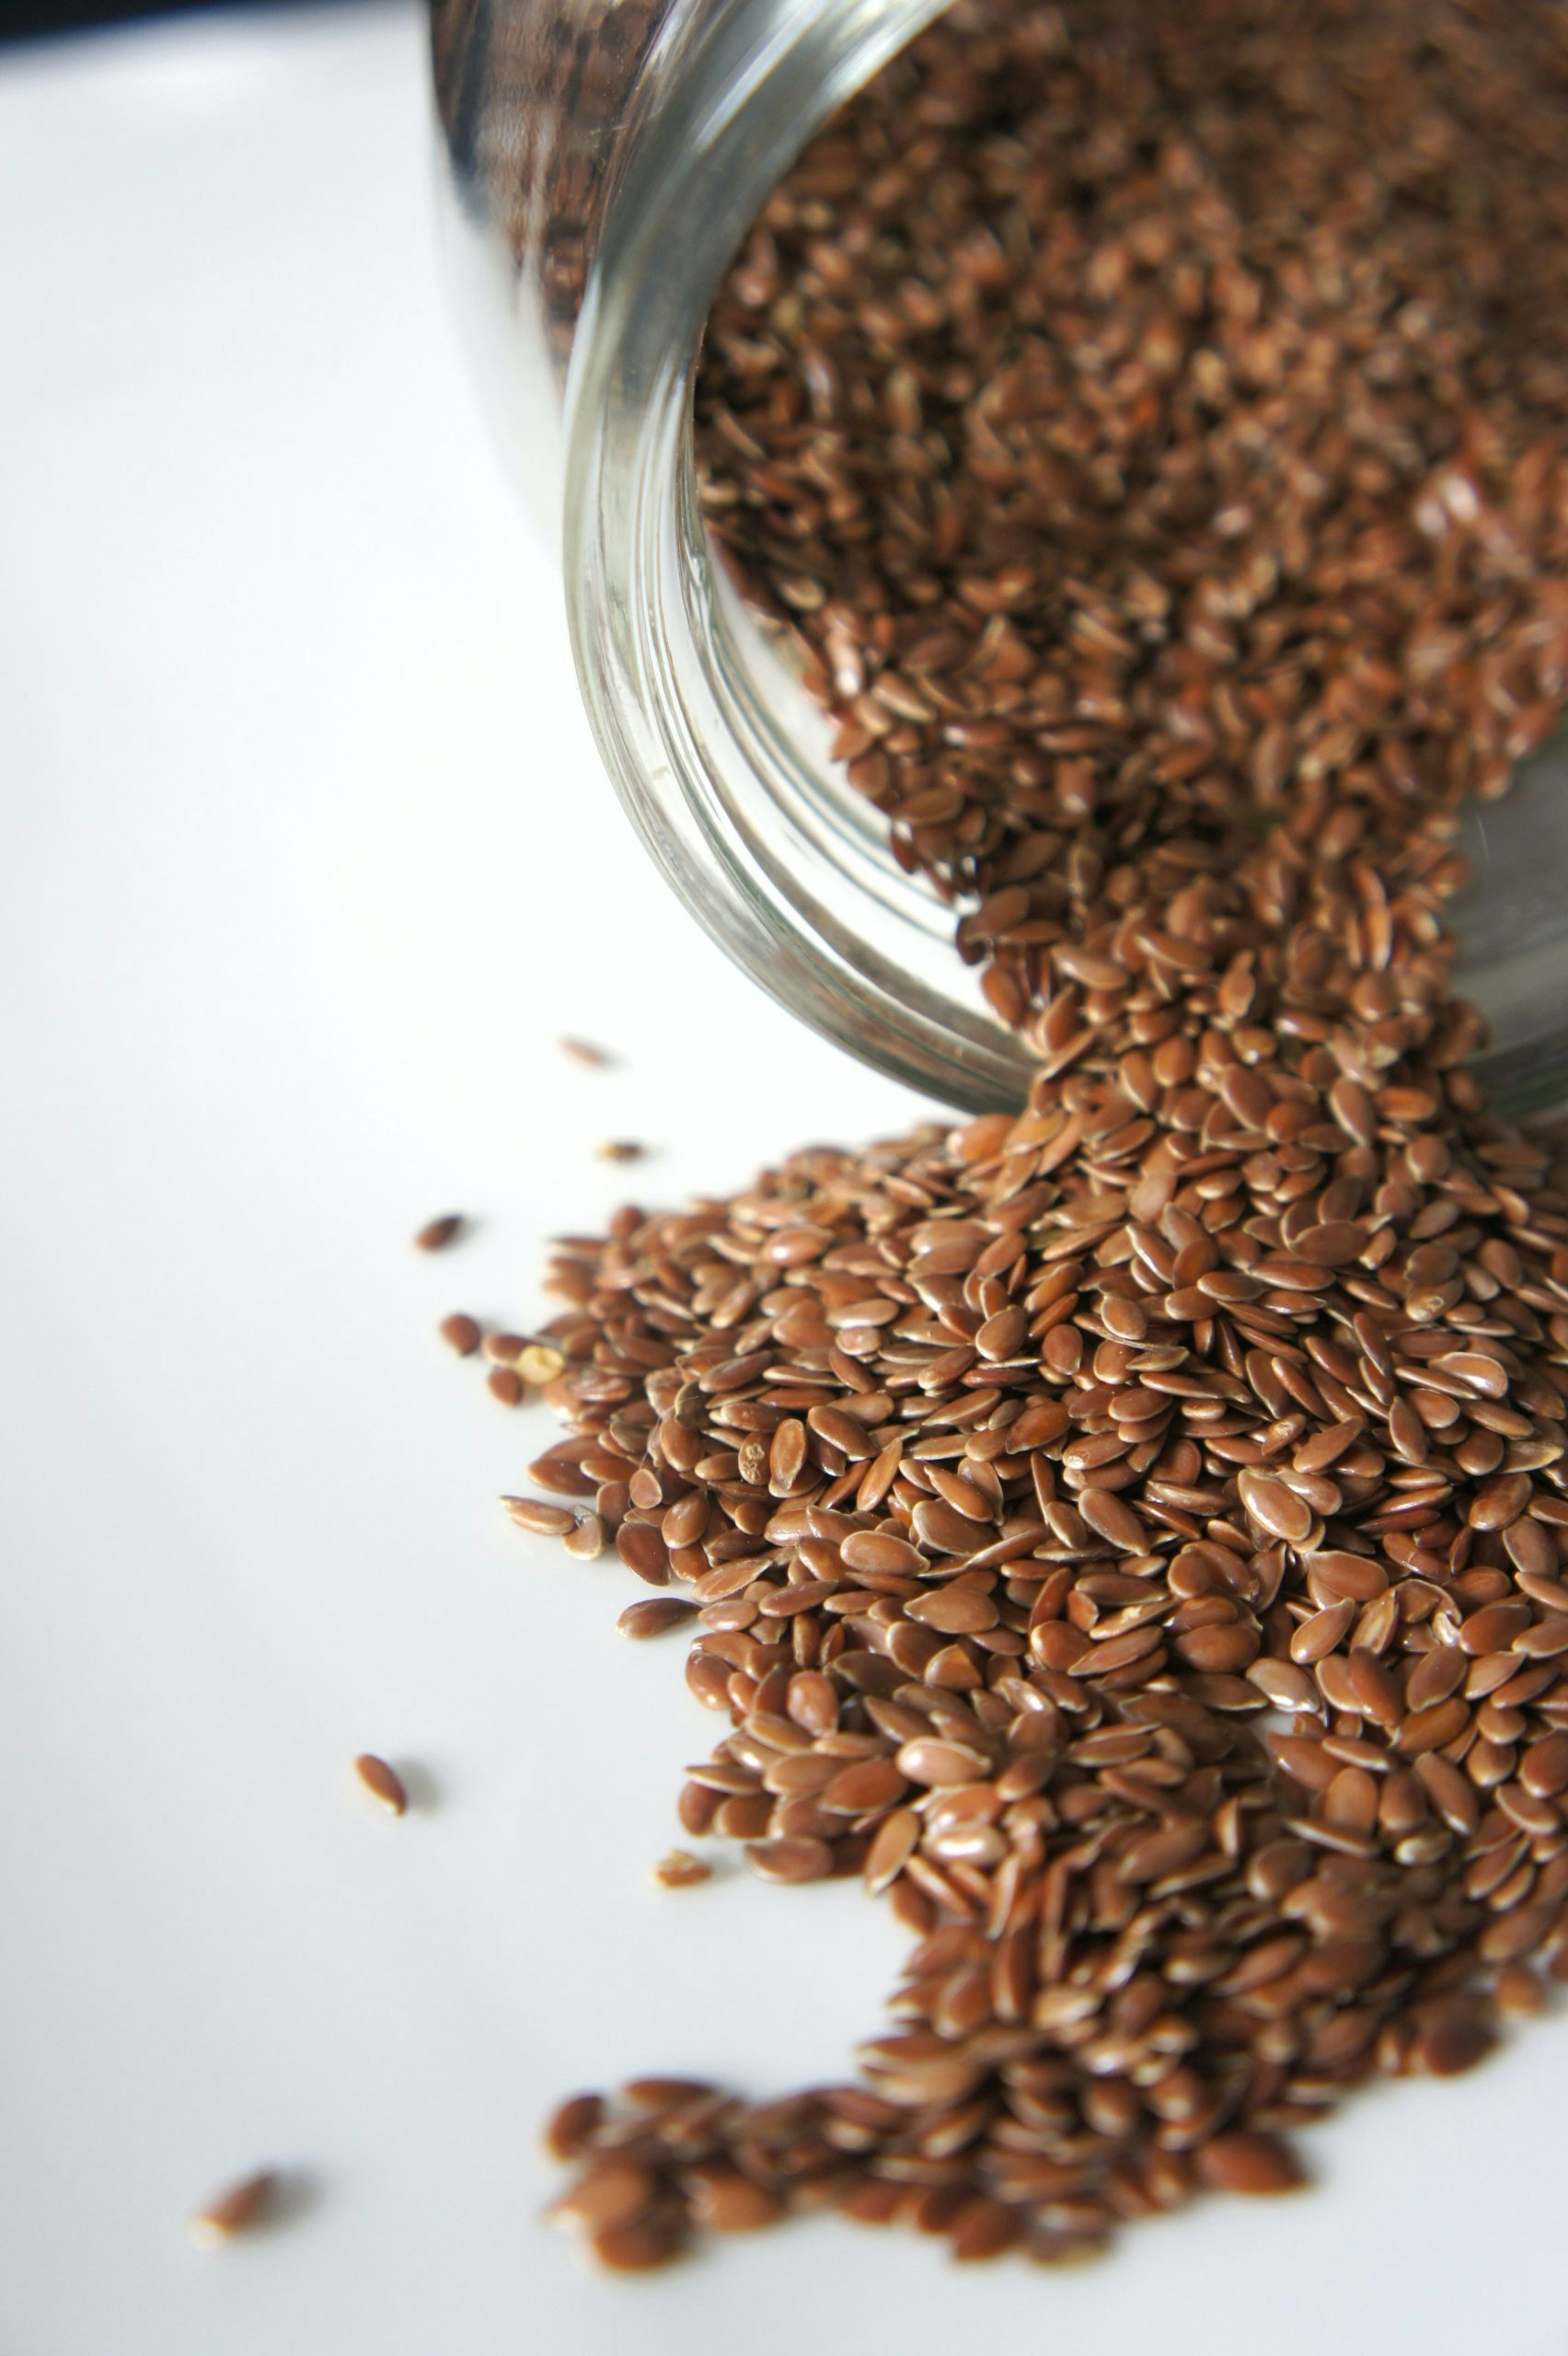 Let's make flax seeds